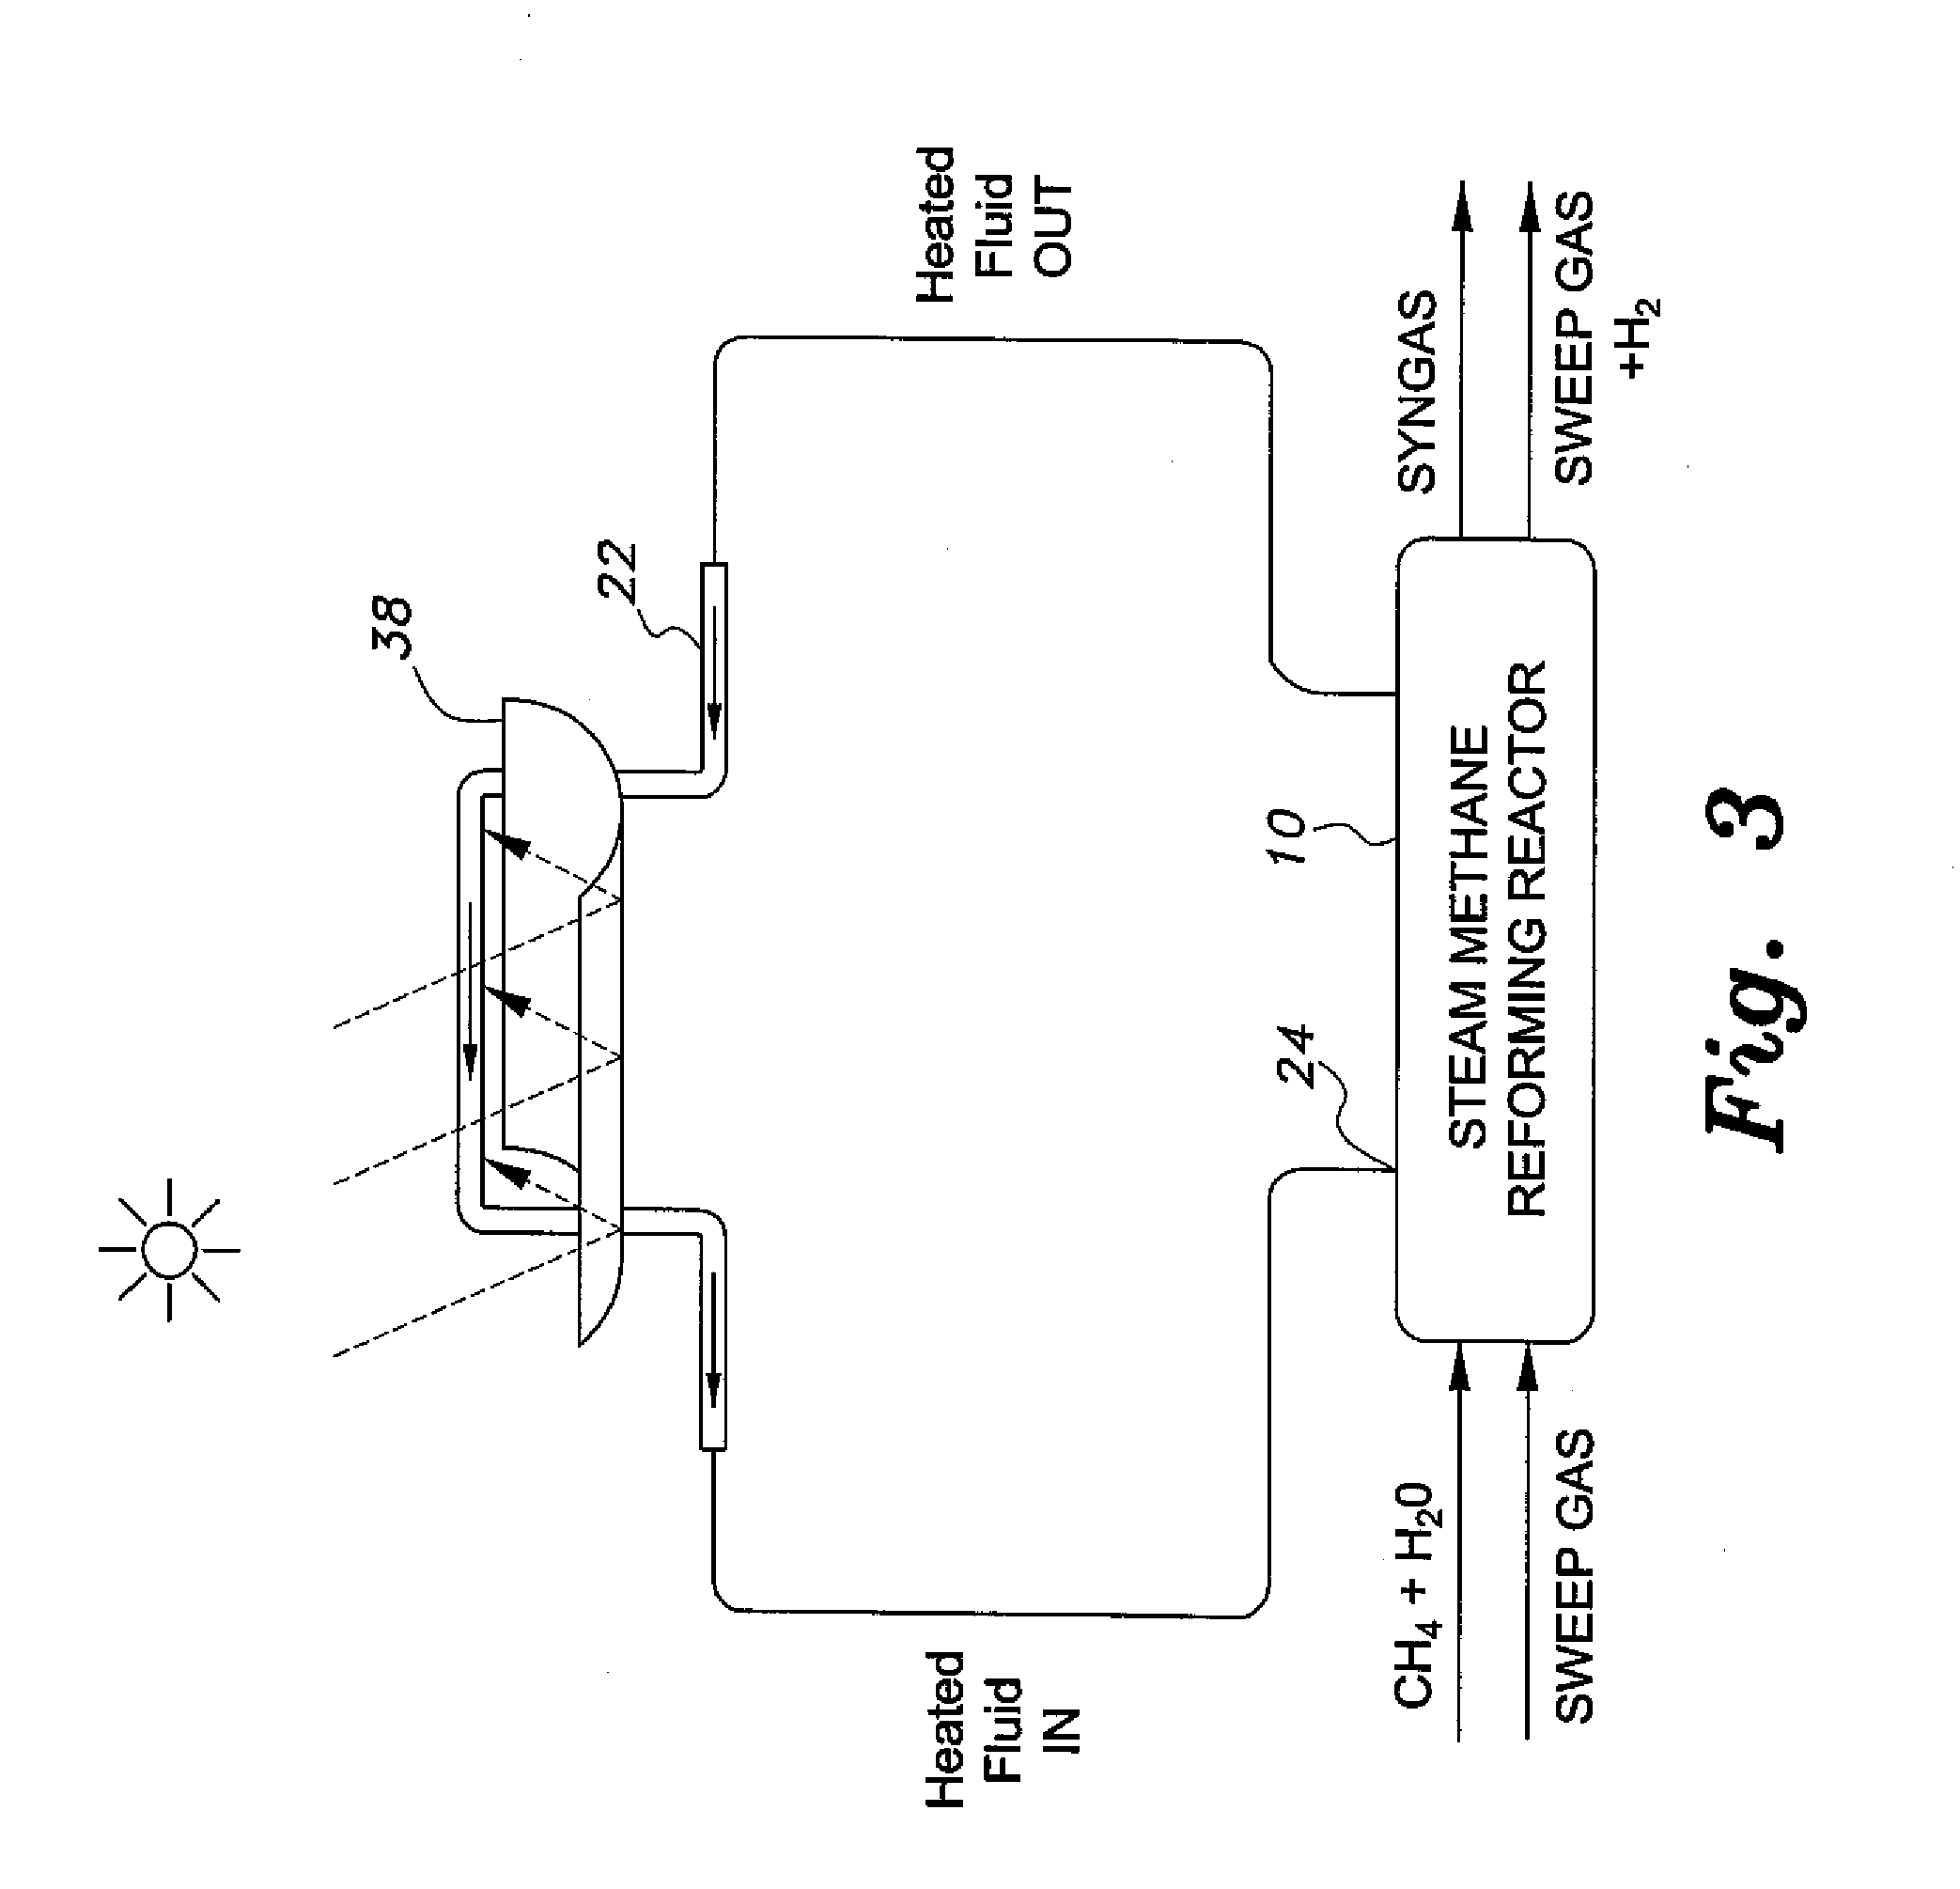 Steam methane reforming reactor with hydrogen selective membrane